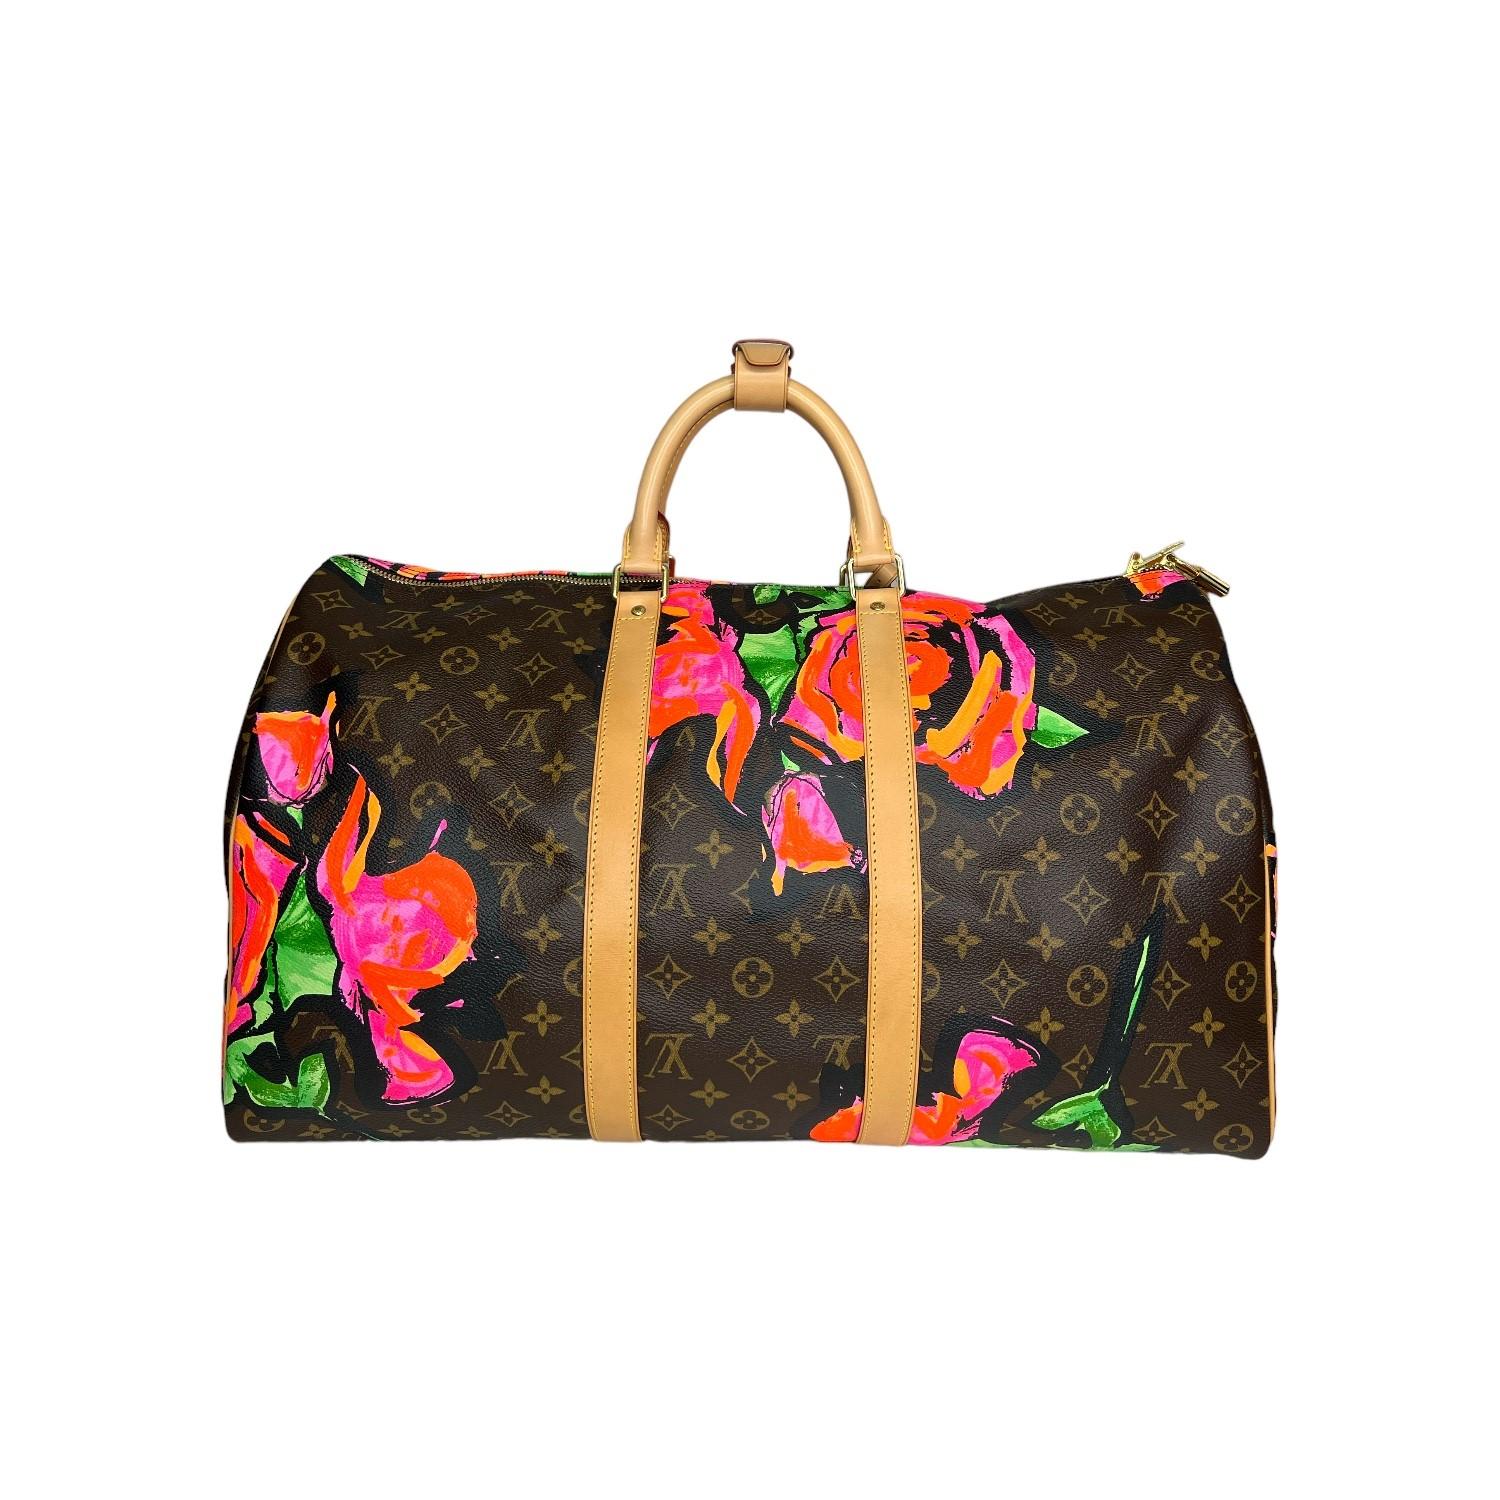 This Louis Vuitton Monogram Roses Keepall 50 was made in France in 2008 and it is finely crafted of the classic Louis Vuitton Monogram canvas exterior with vibrant rose paintings with leather trimming and gold-tone hardware features. It has rolled